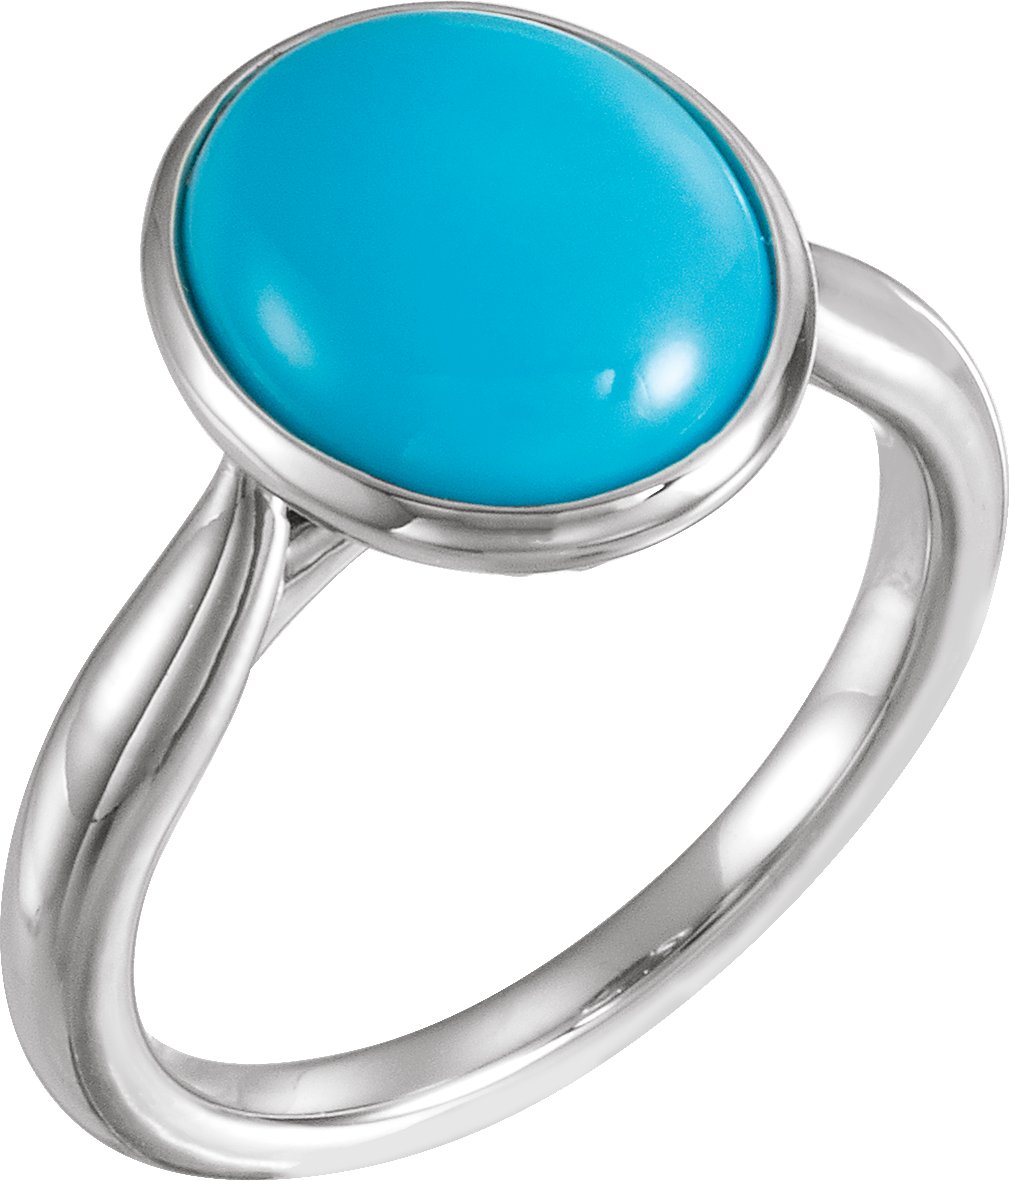 14K White 8x6 mm Oval Cabochon Turquoise Ring